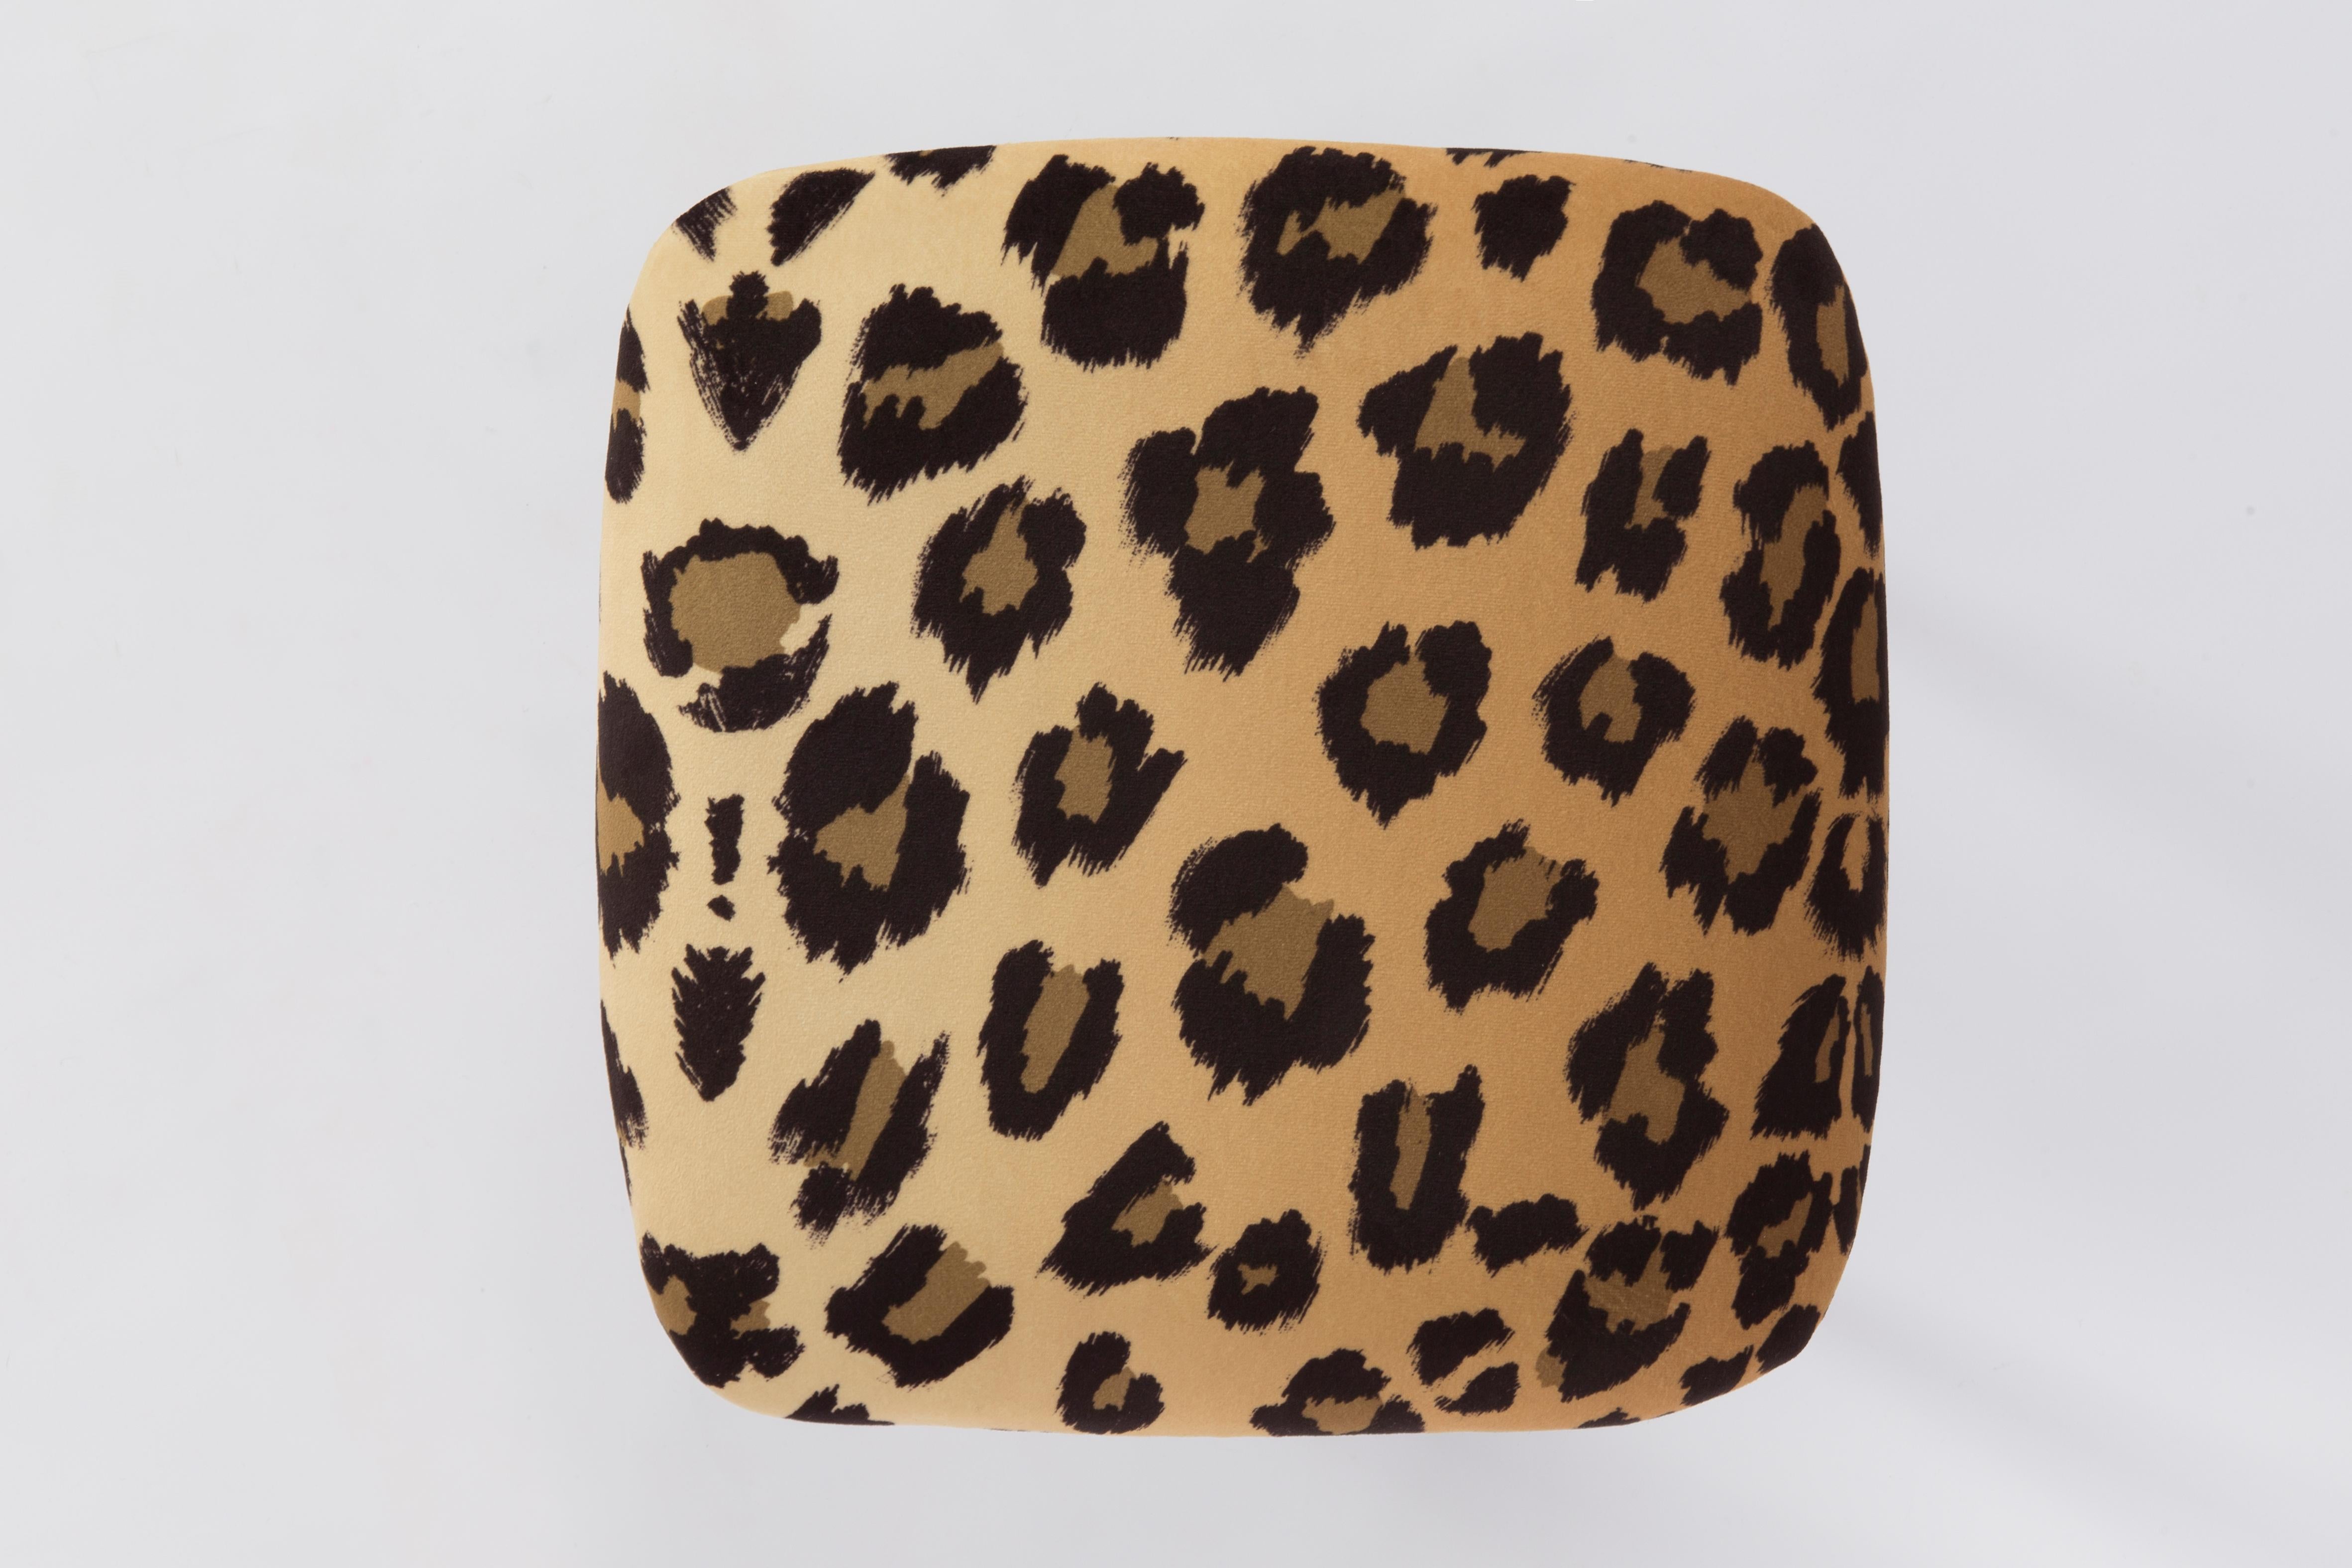 Stool from the turn of the 1960s and 1970s. Beautiful soft velvet leopard print upholstery. The stool consists of an upholstered part, a seat and wooden legs narrowing downwards, characteristic of the 1960s style.